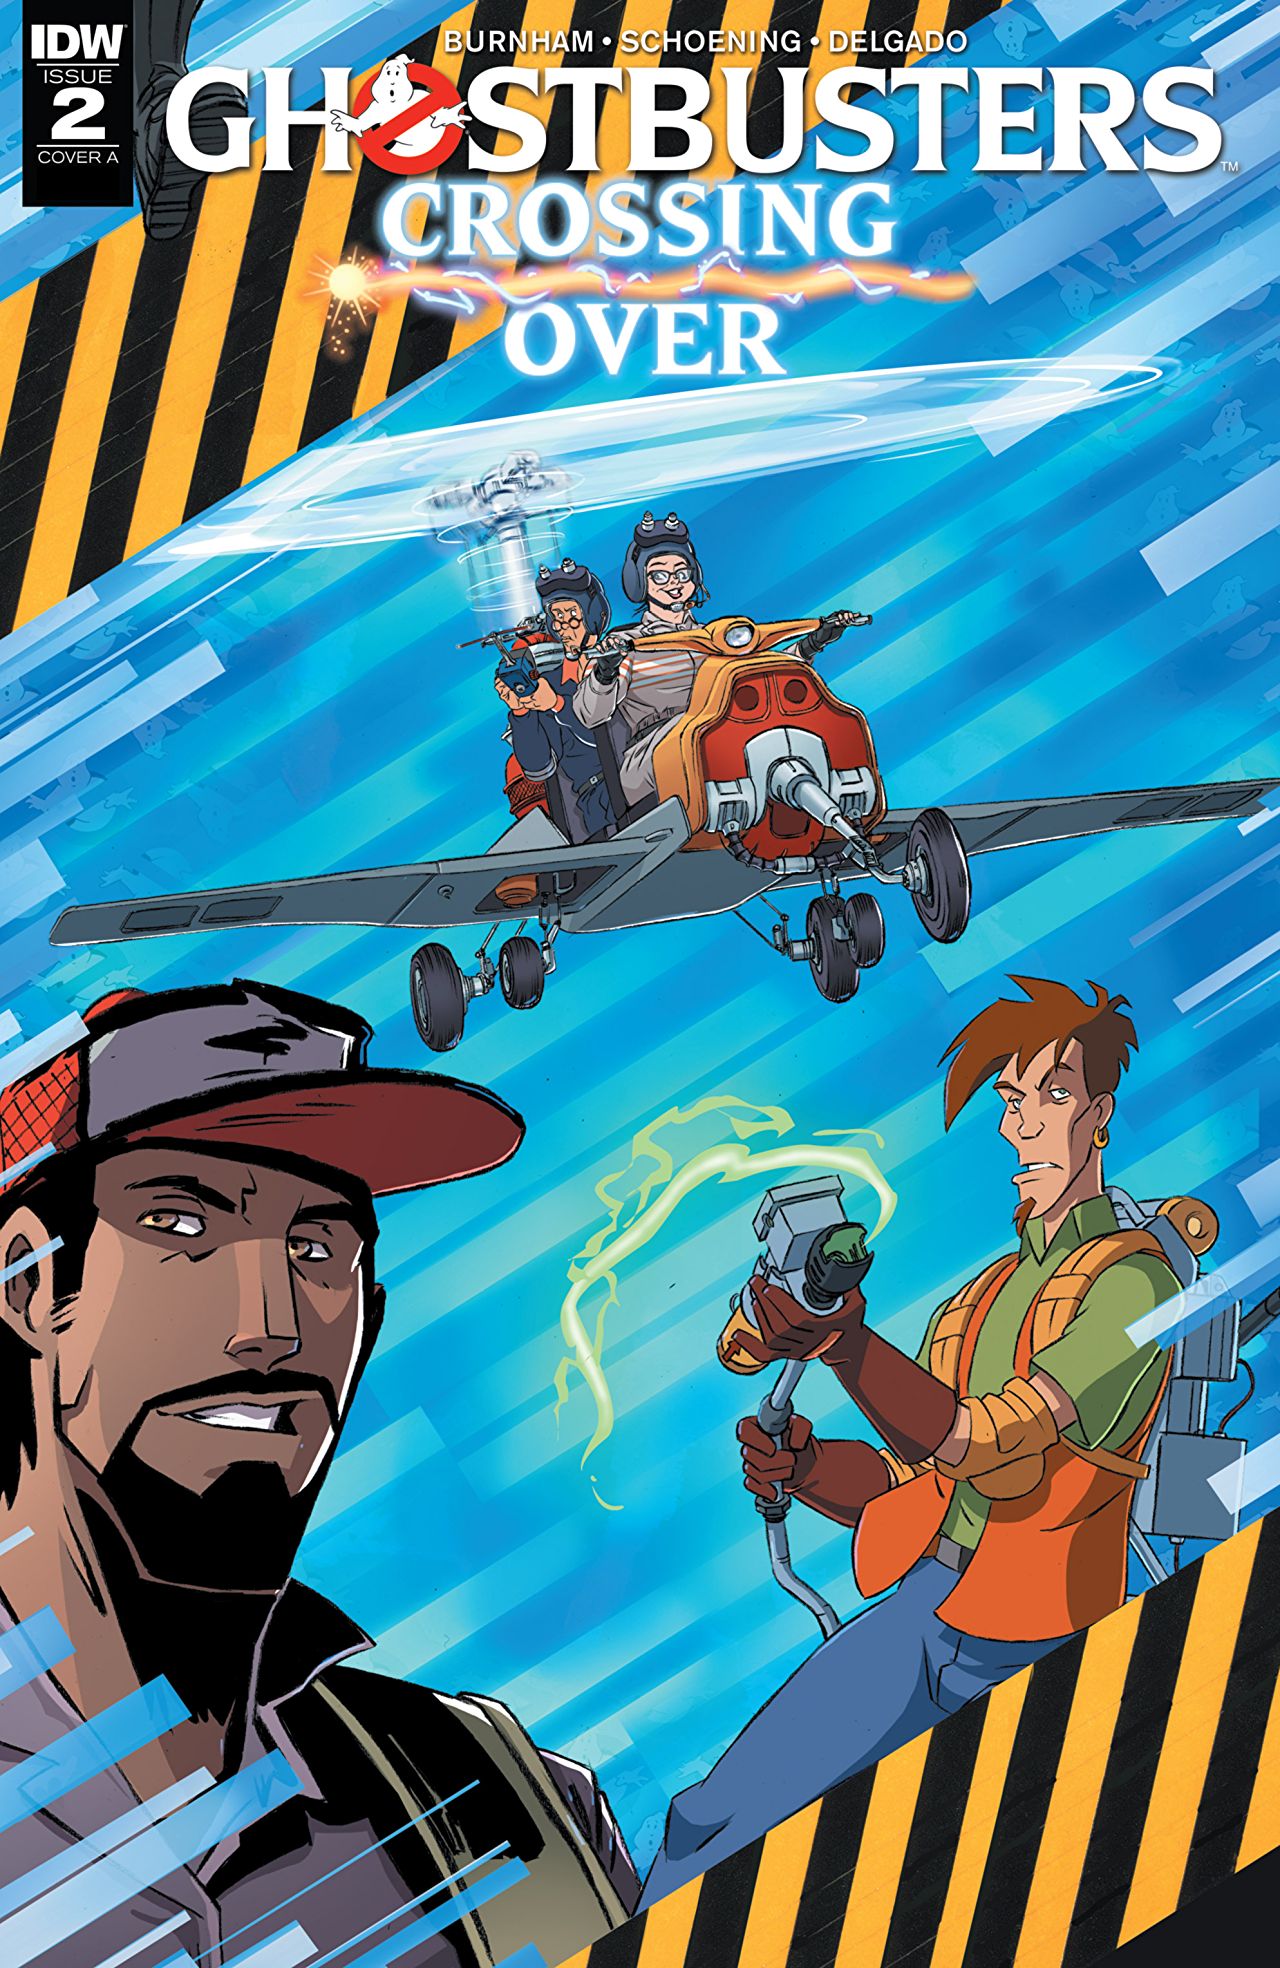 Ghostbusters: Crossing Over #2 Review